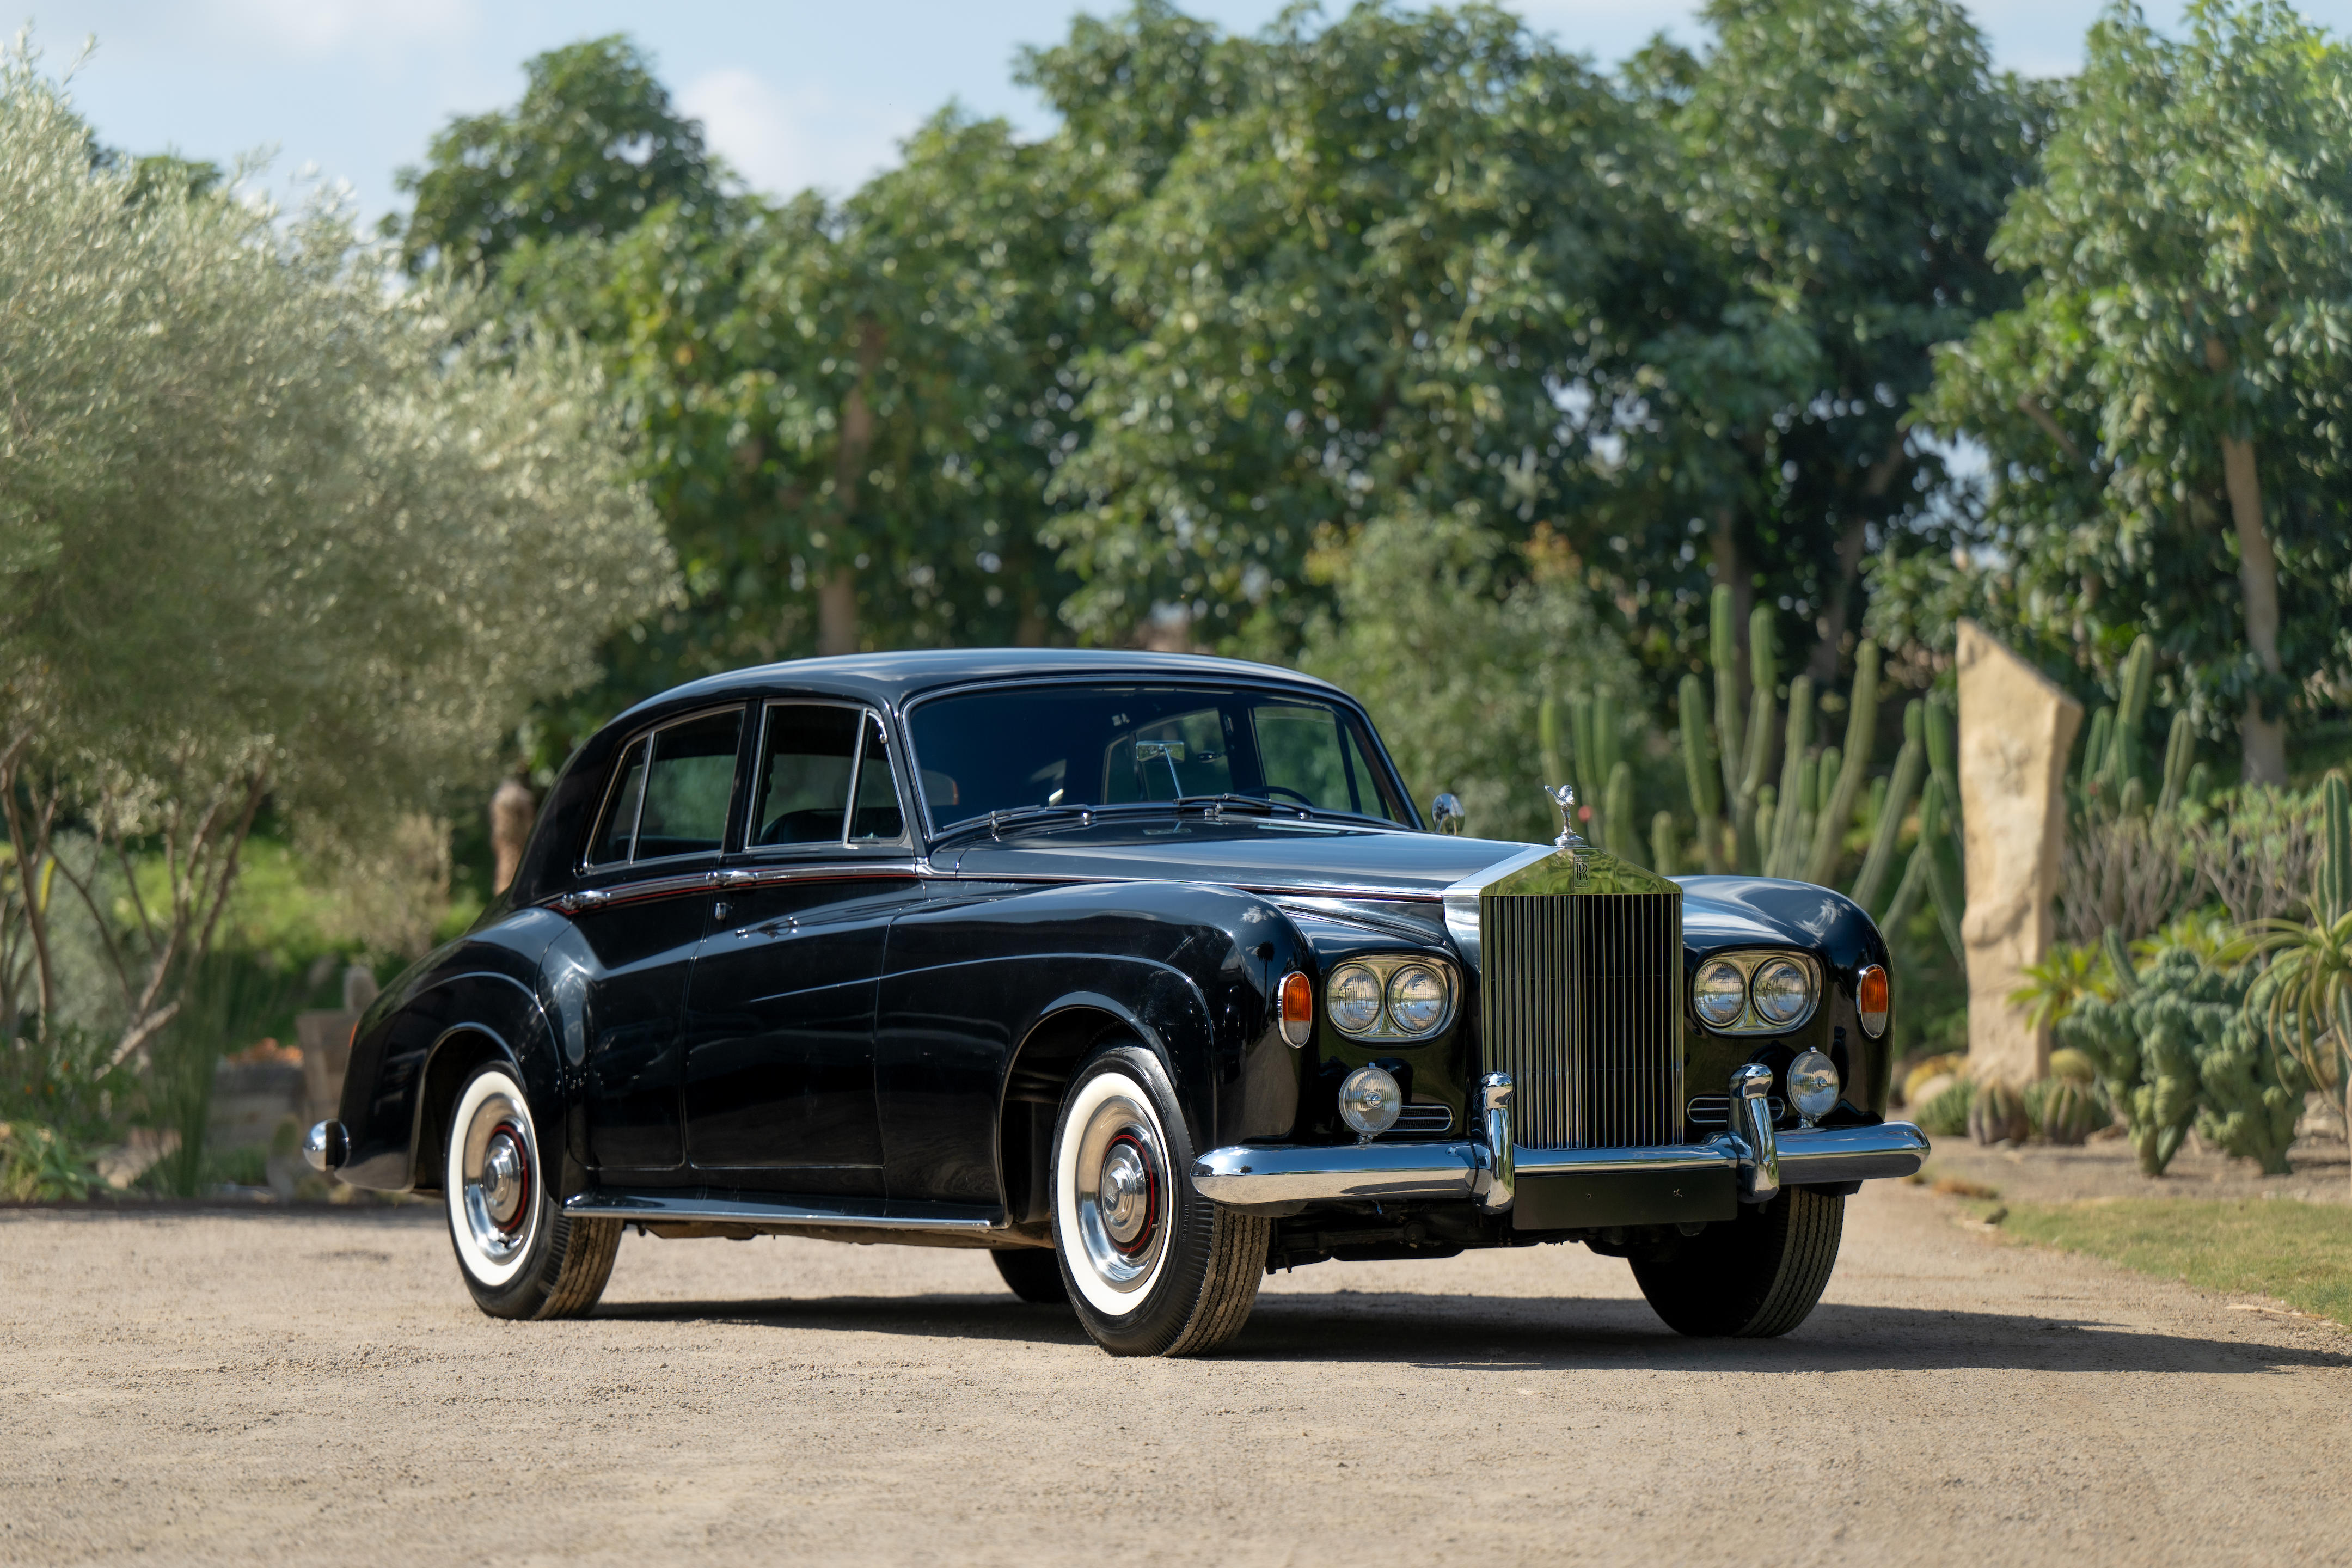 Bonhams Cars : 1965 Rolls-Royce Silver Cloud III Touring Limousine Chassis  no. LCDL81